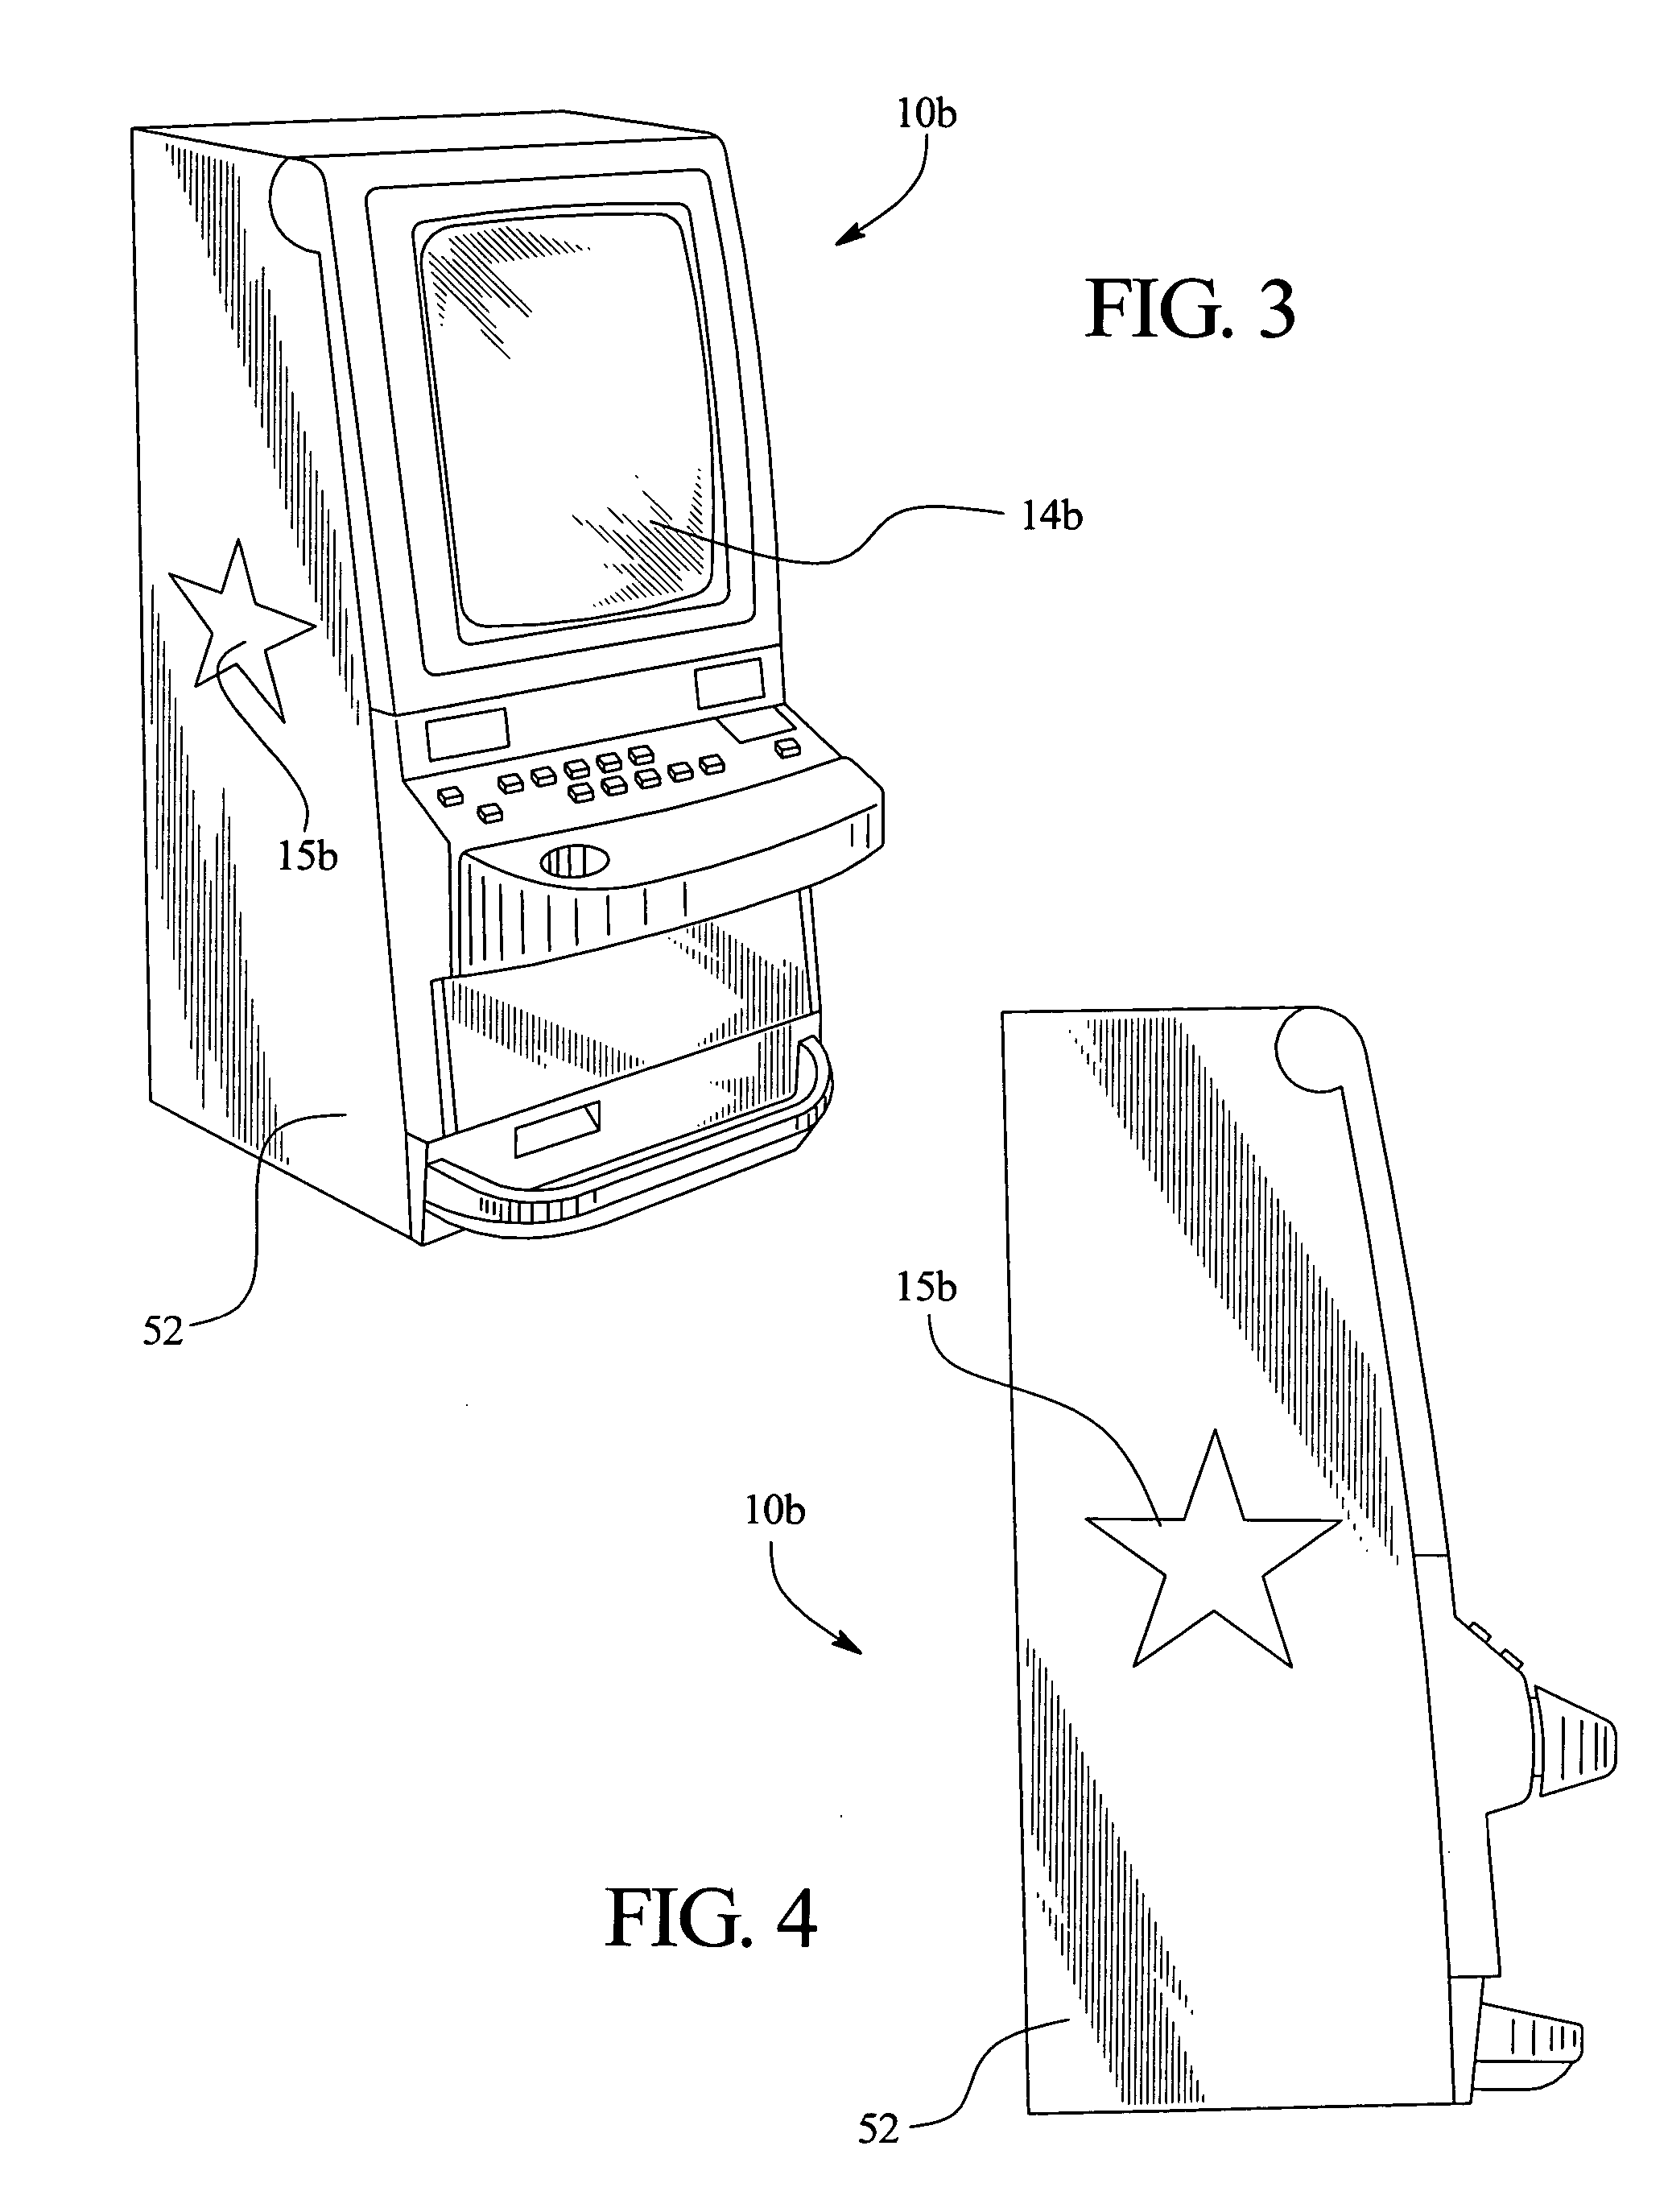 Method of assembling a gaming device including modular cabinets and replaceable laminate panels